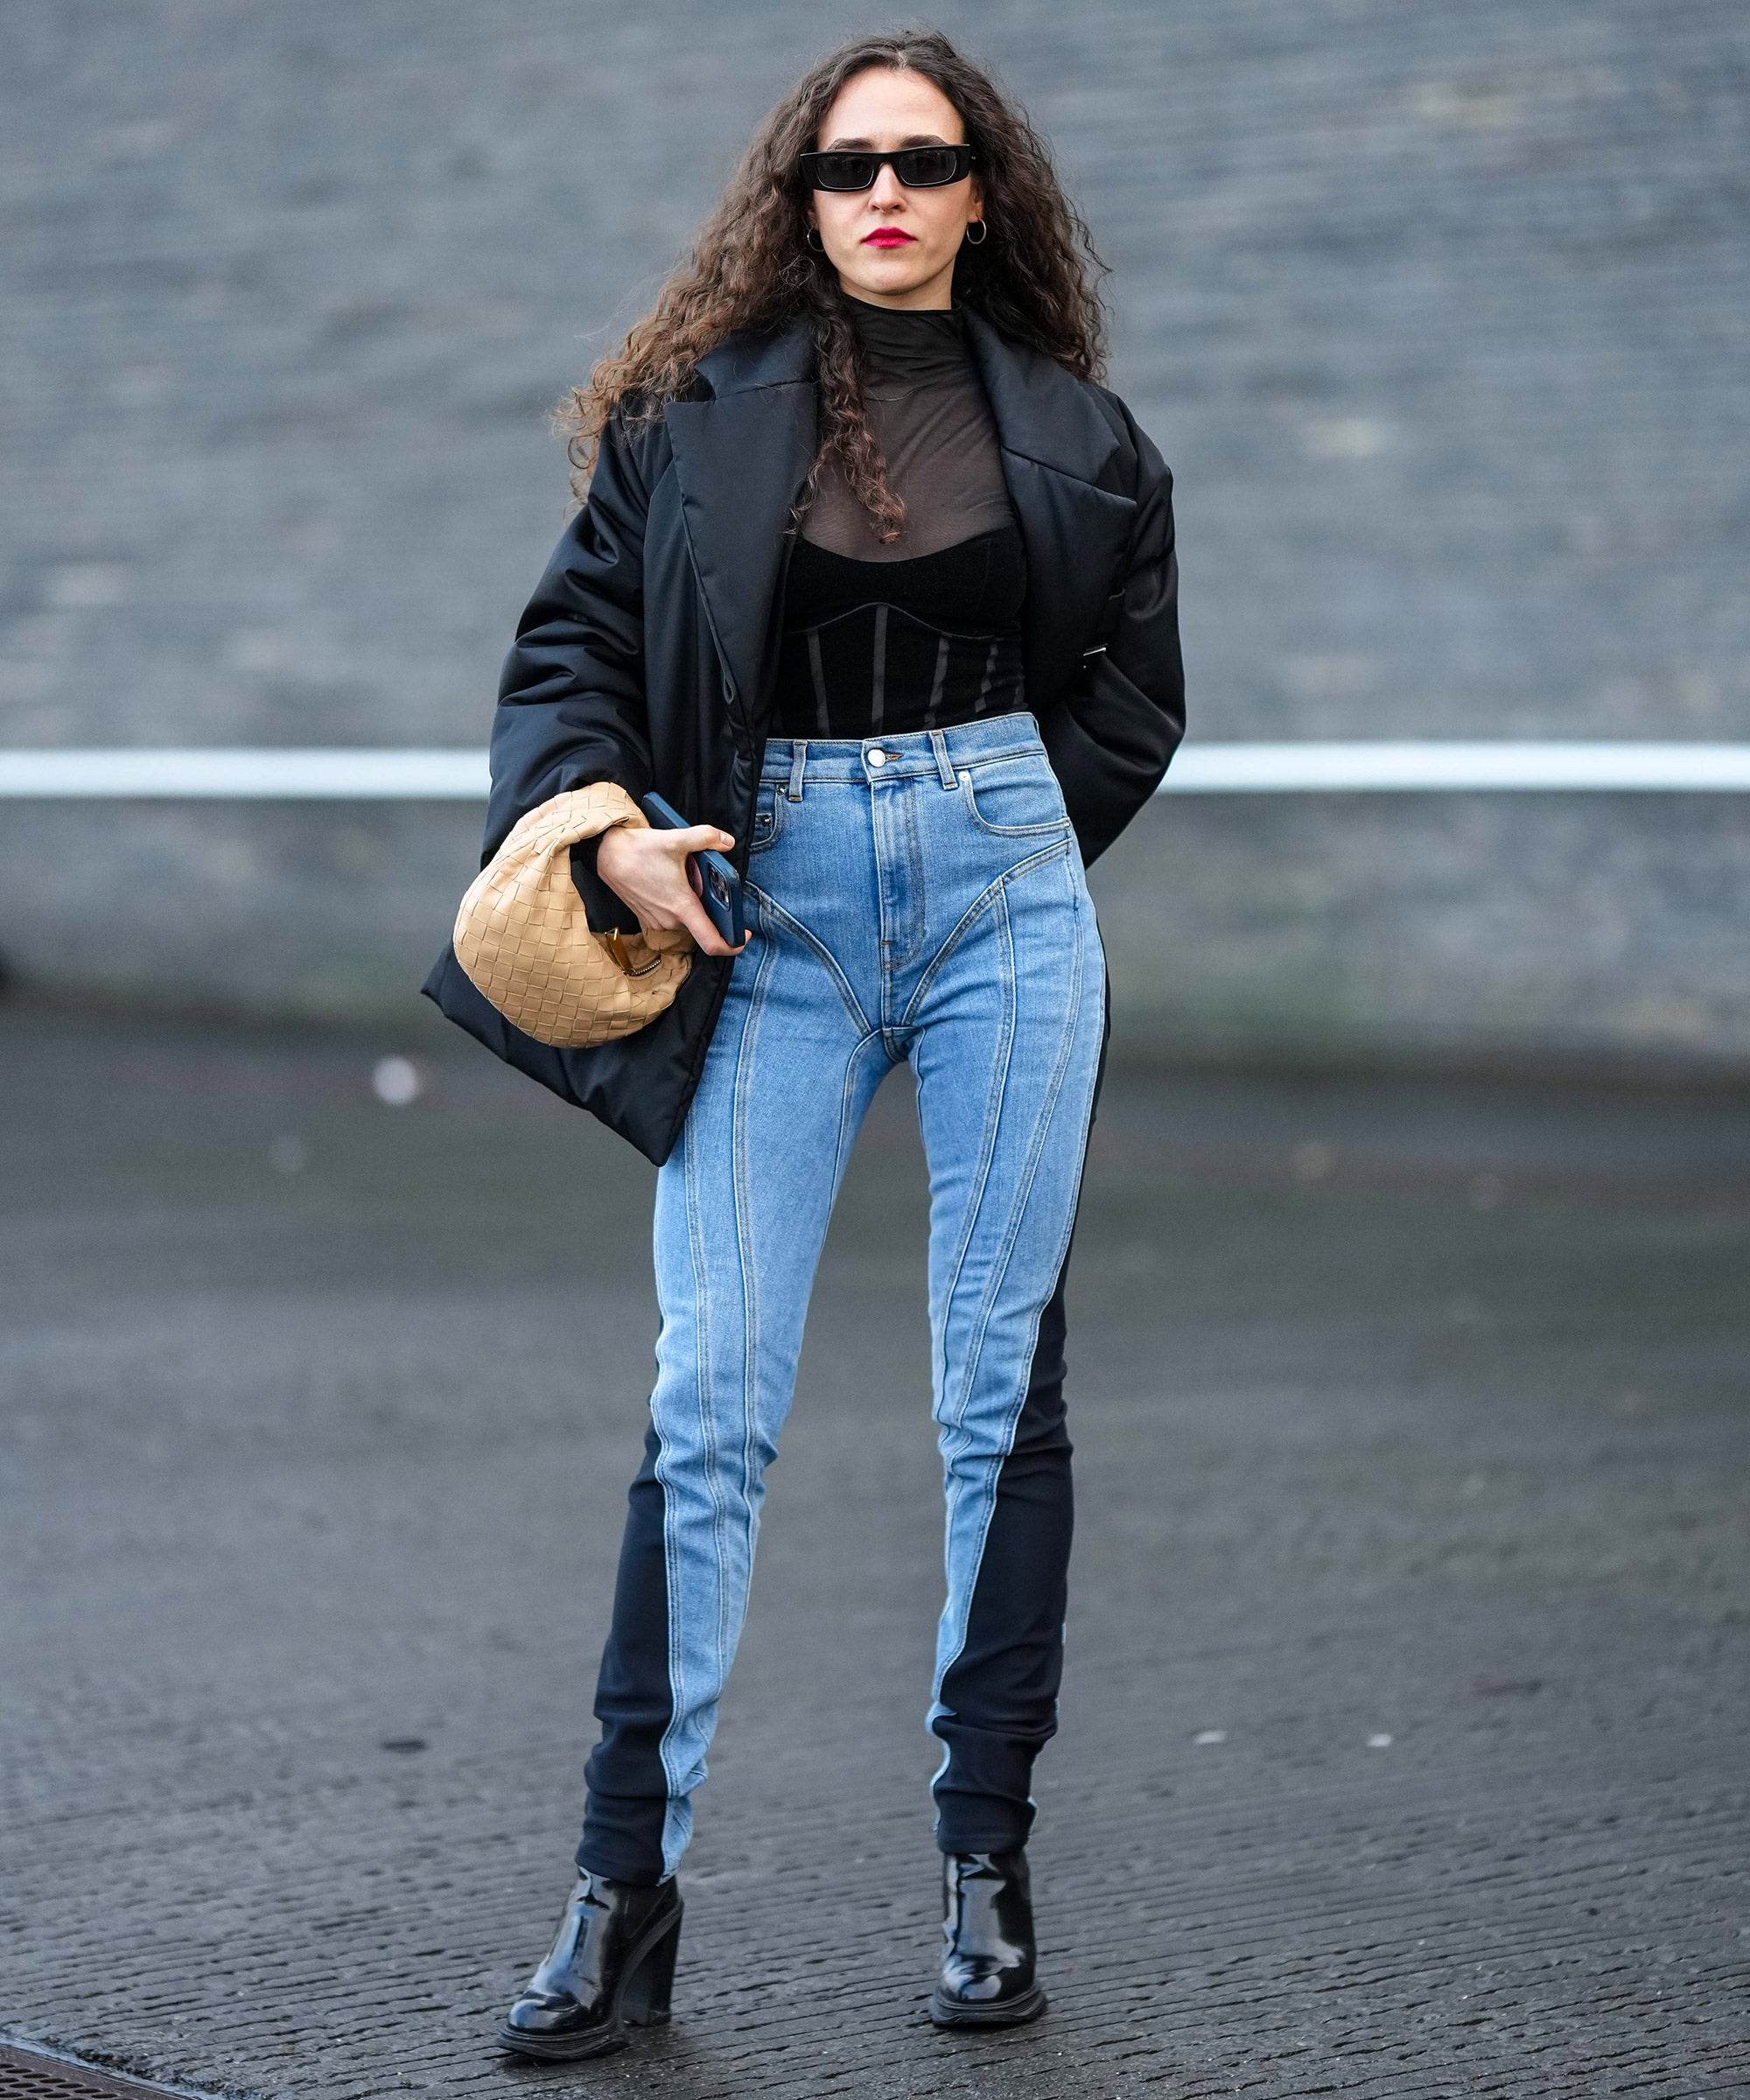 19 Best Winter Jeans Outfits for Girls to Stay Cozy and Chic  How to wear  white jeans, Jeans outfit winter, White denim outfit